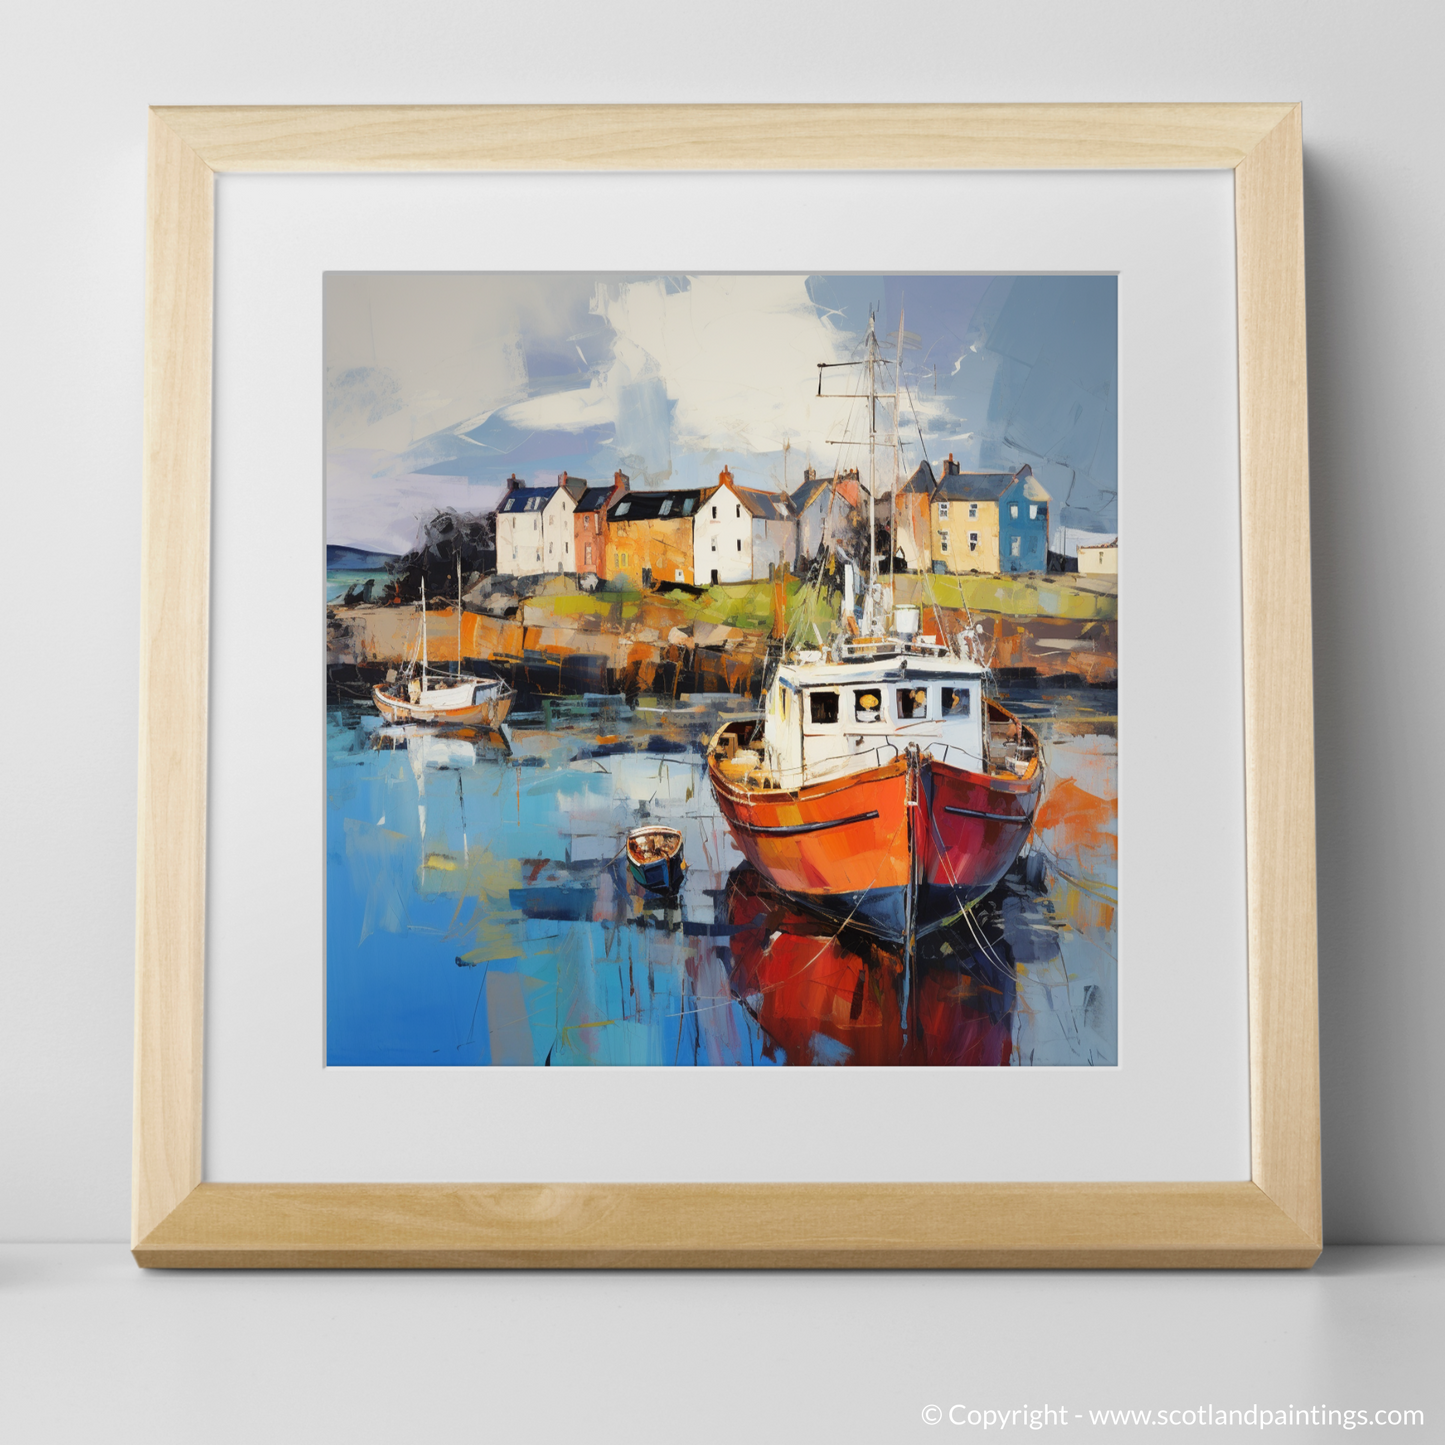 Art Print of Millport Harbour, Isle of Cumbrae with a natural frame